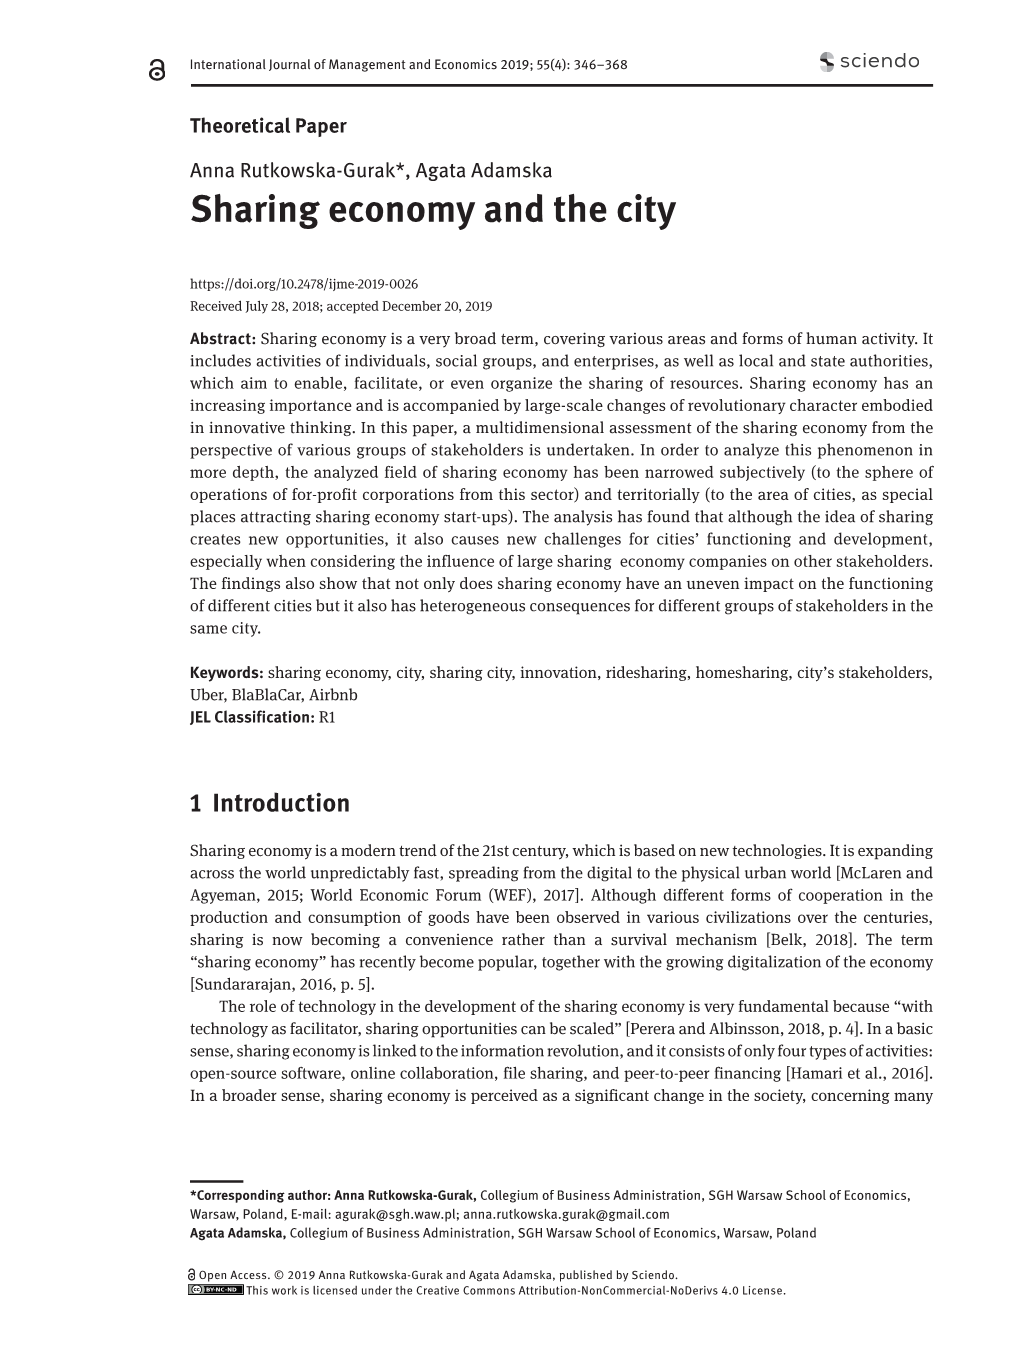 Sharing Economy and the City